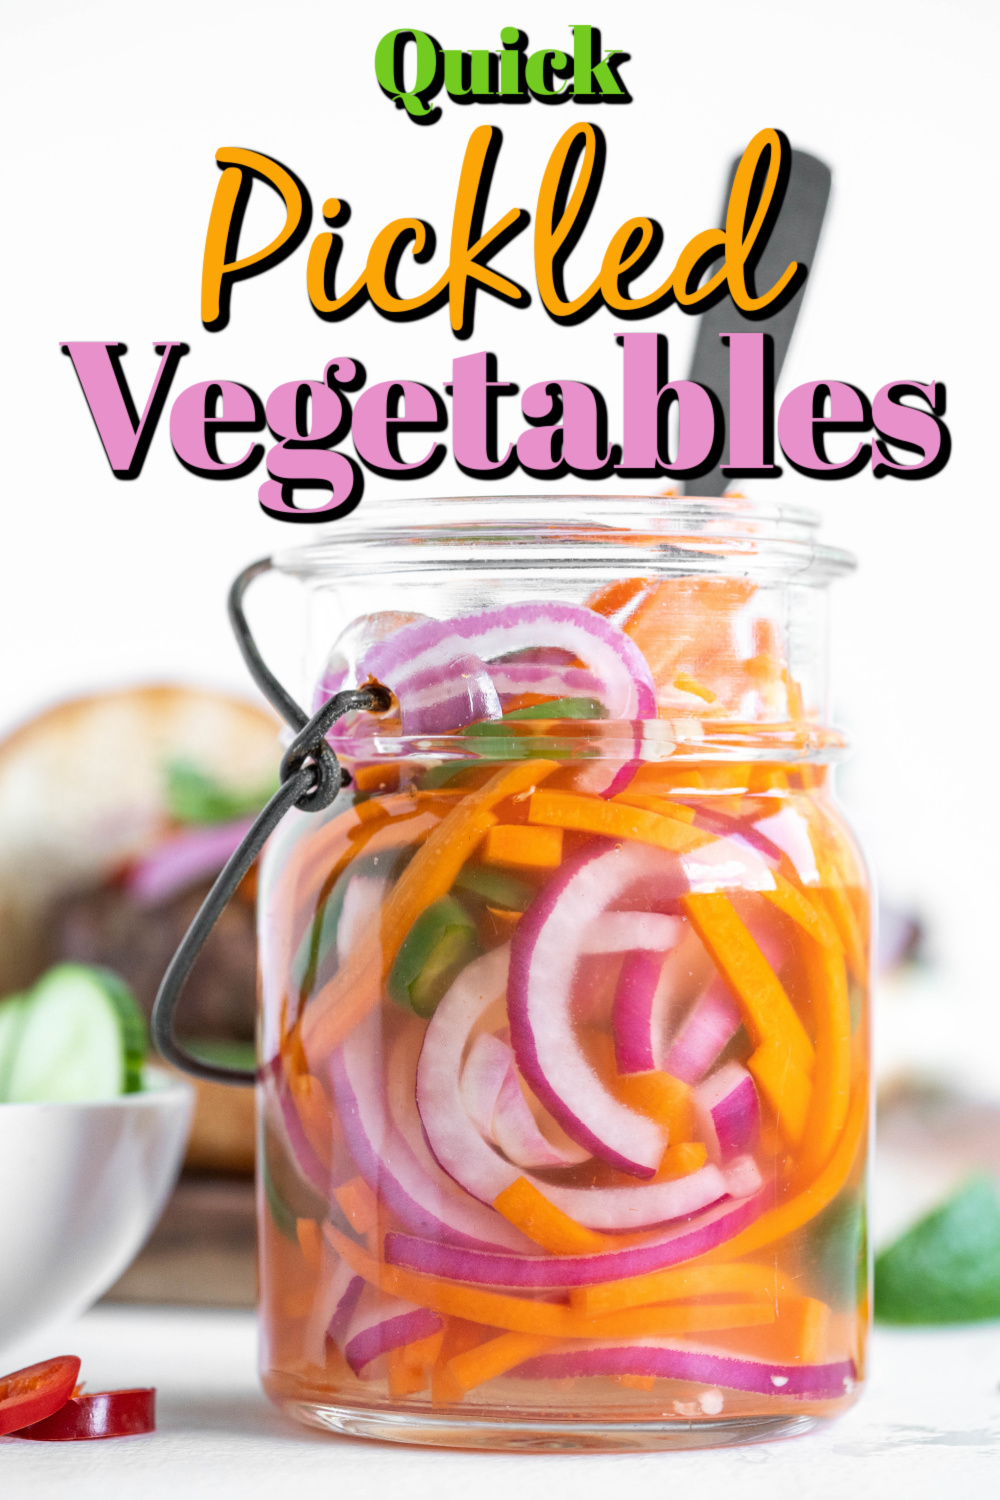 These pickled veggies are fantastic on so many things. They are perfect for toppings on burgers, deli-style sandwiches, or just to munch on right out of the jar!